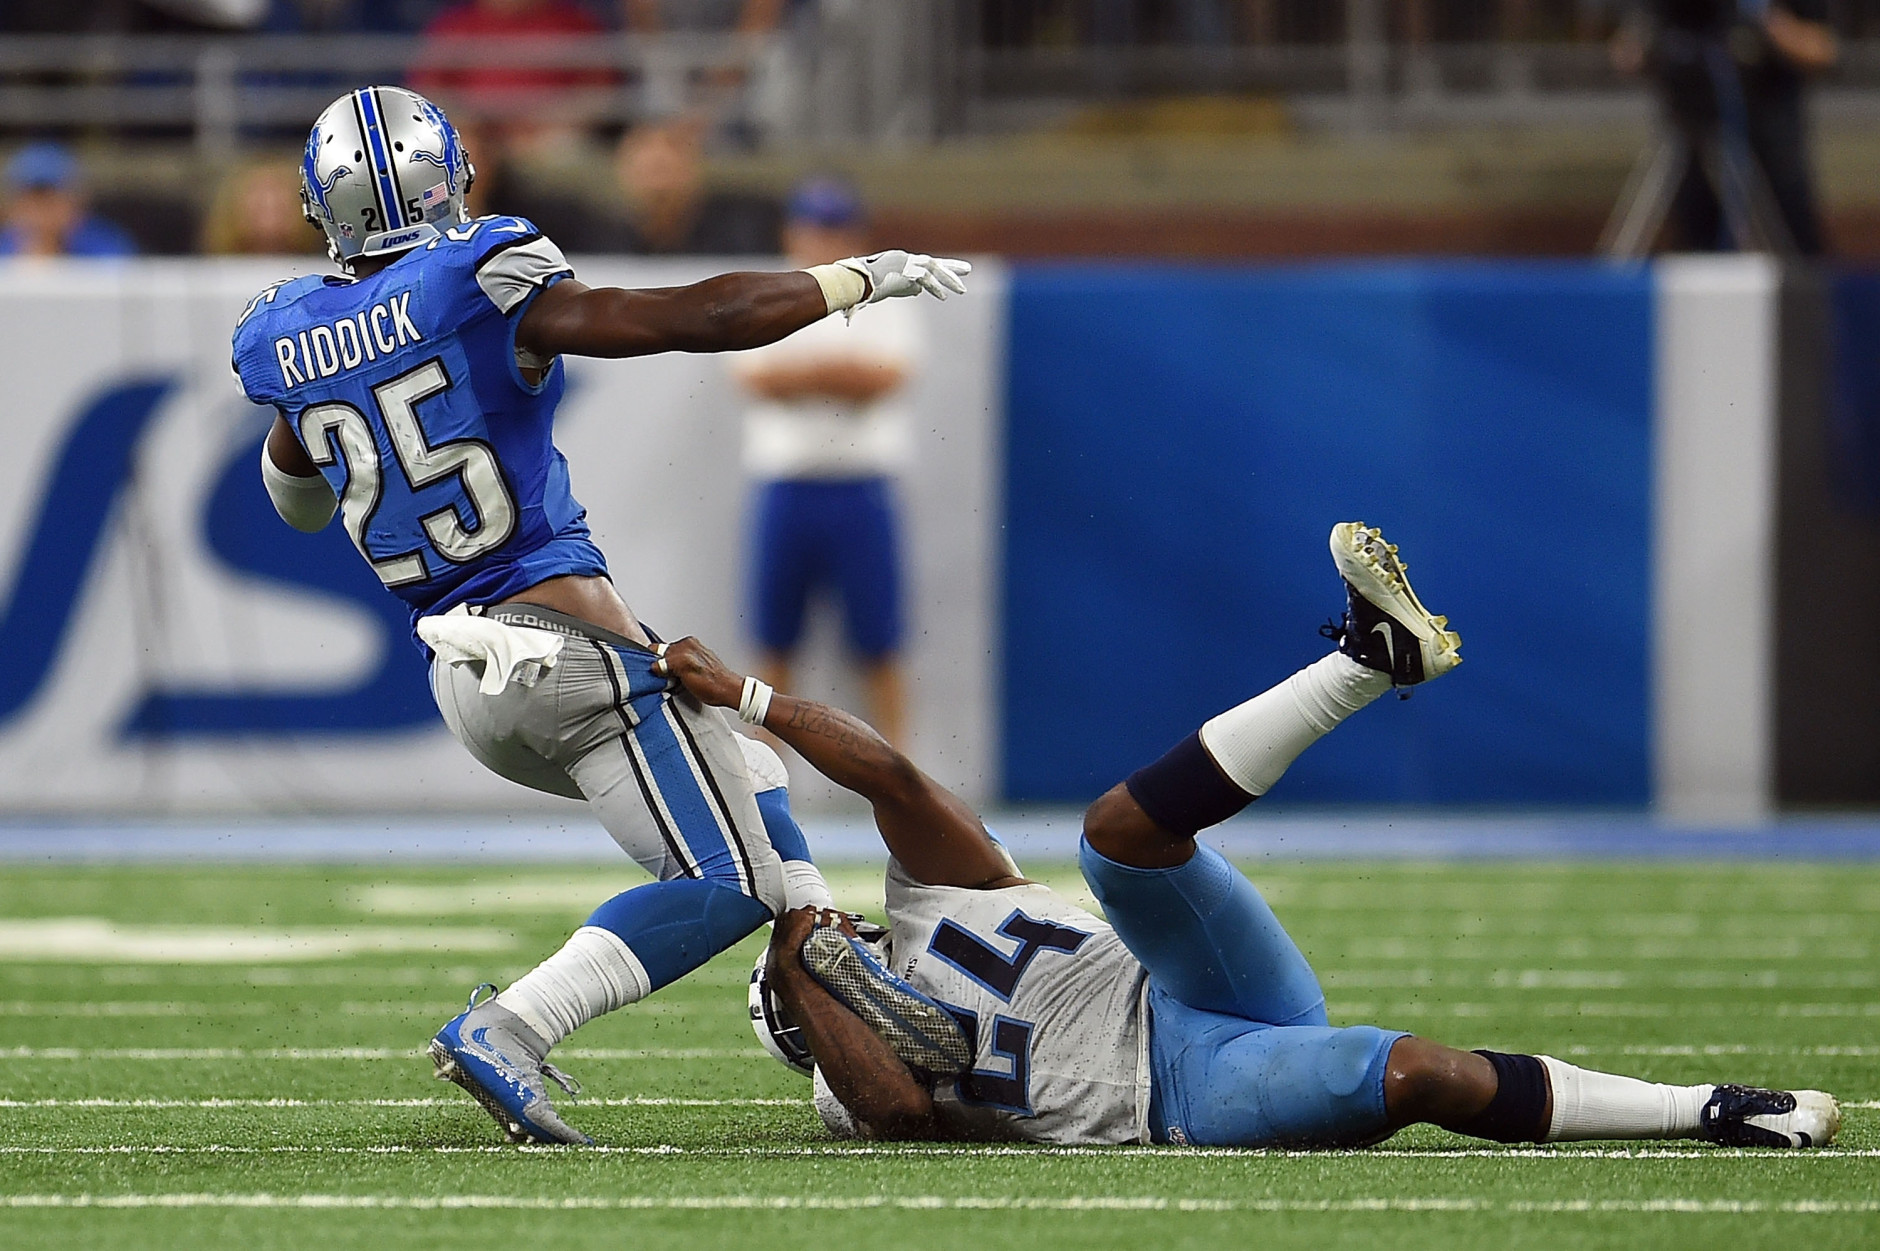 DETROIT, MI - SEPTEMBER 18:  Theo Riddick #25 of the Detroit Lions is brought down by Daimion Stafford #24 of the Tennessee Titans during a game at Ford Field on September 18, 2016 in Detroit, Michigan.  (Photo by Stacy Revere/Getty Images)